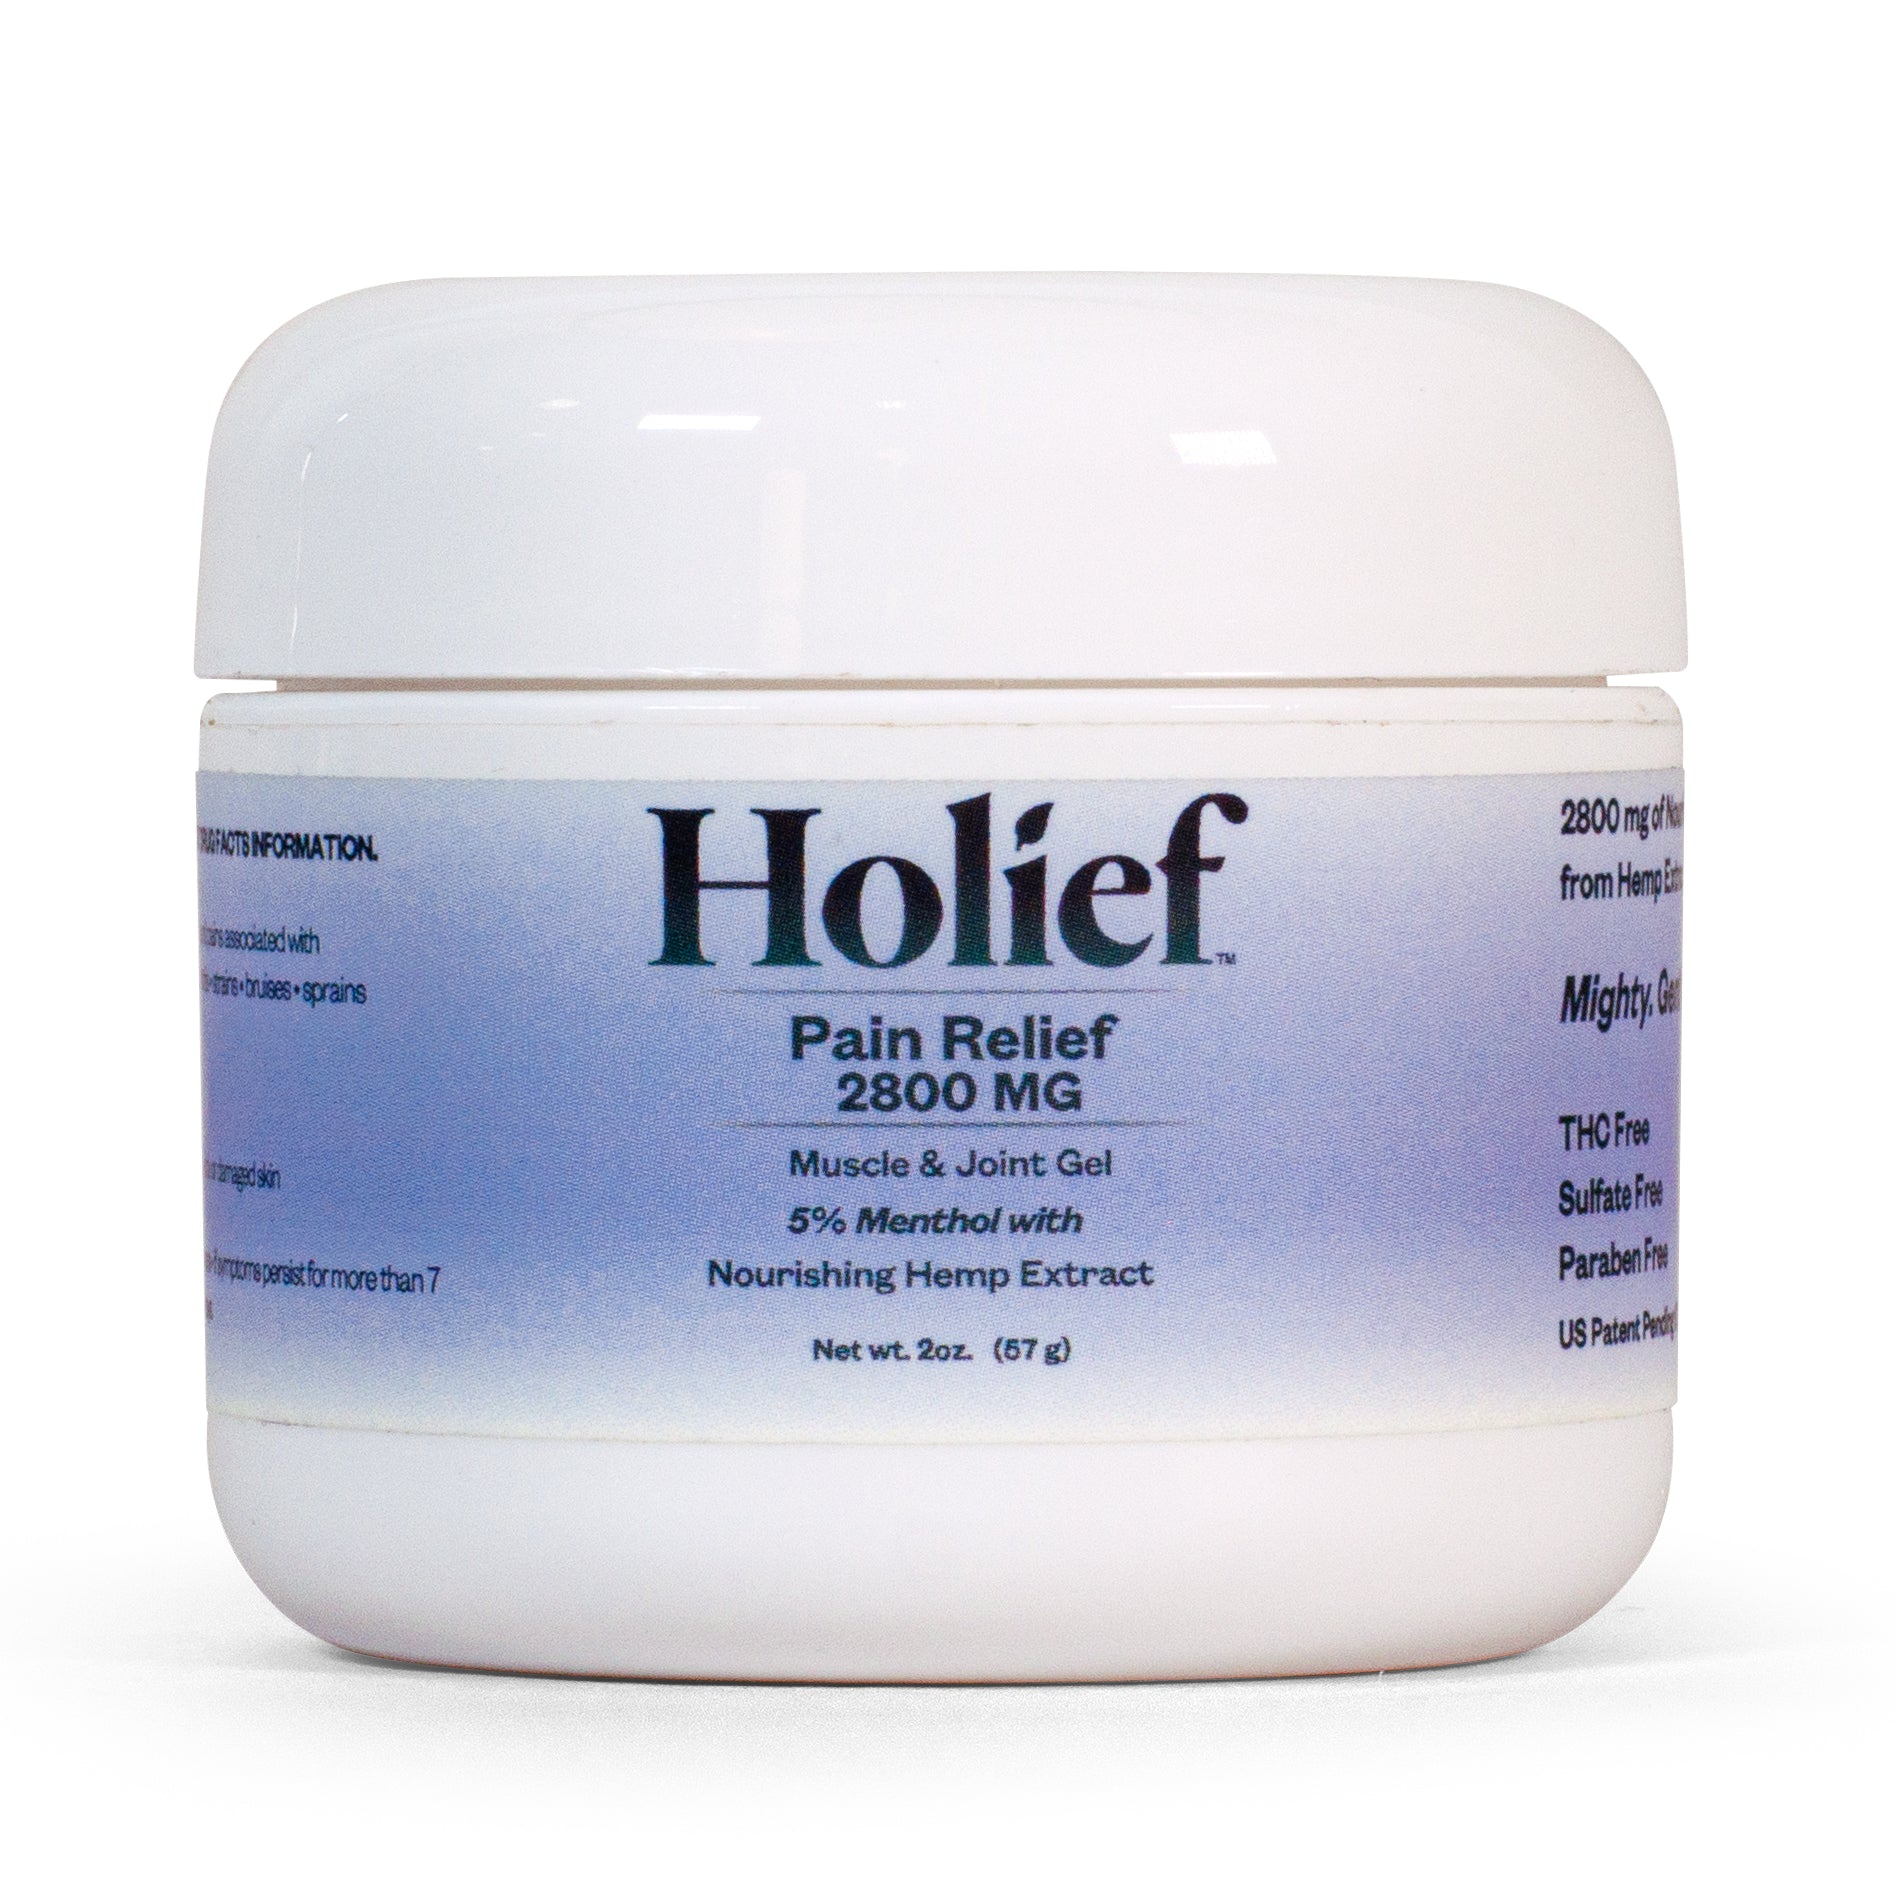 Holief Pain Relief 2800mg CBD Muscle & Joint Gel